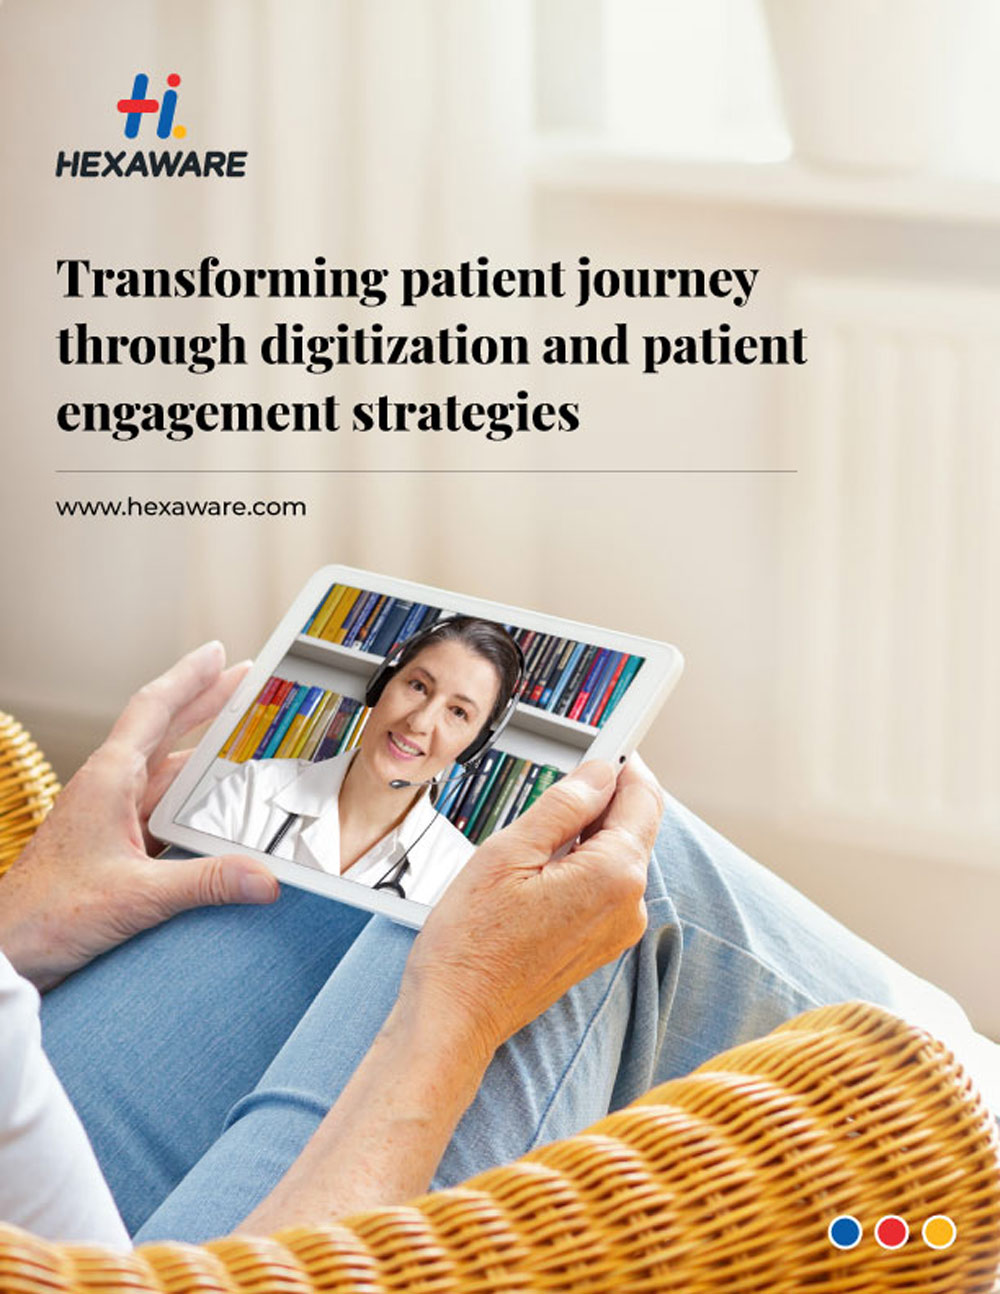 Hexaware: Transforming Patient Journey in Clinical Trials whitepaper